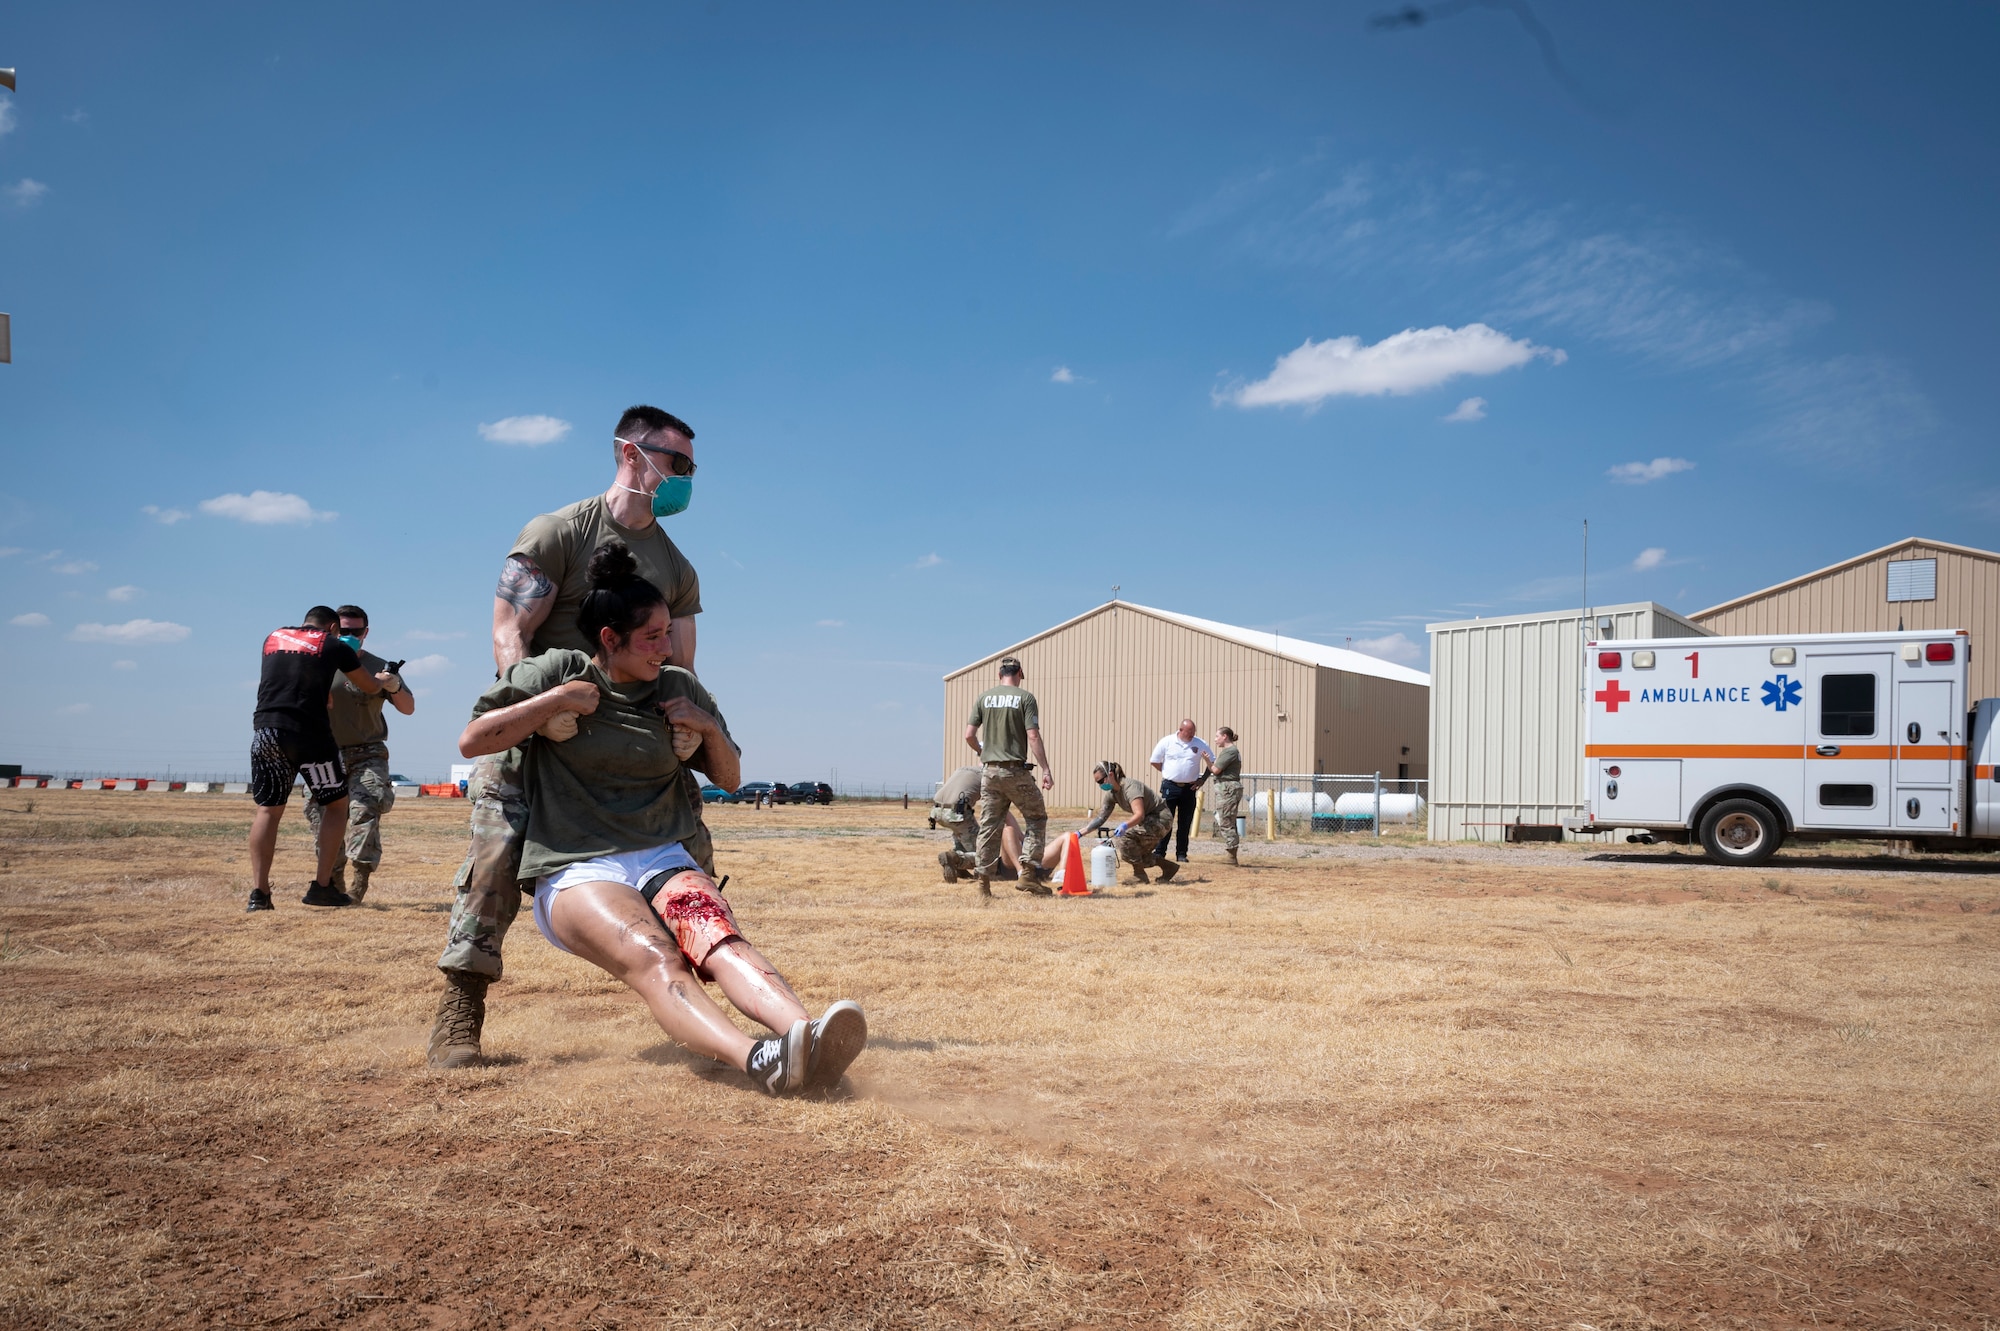 Medics evacuate simulated patients in a field toward an ambulance in the background.